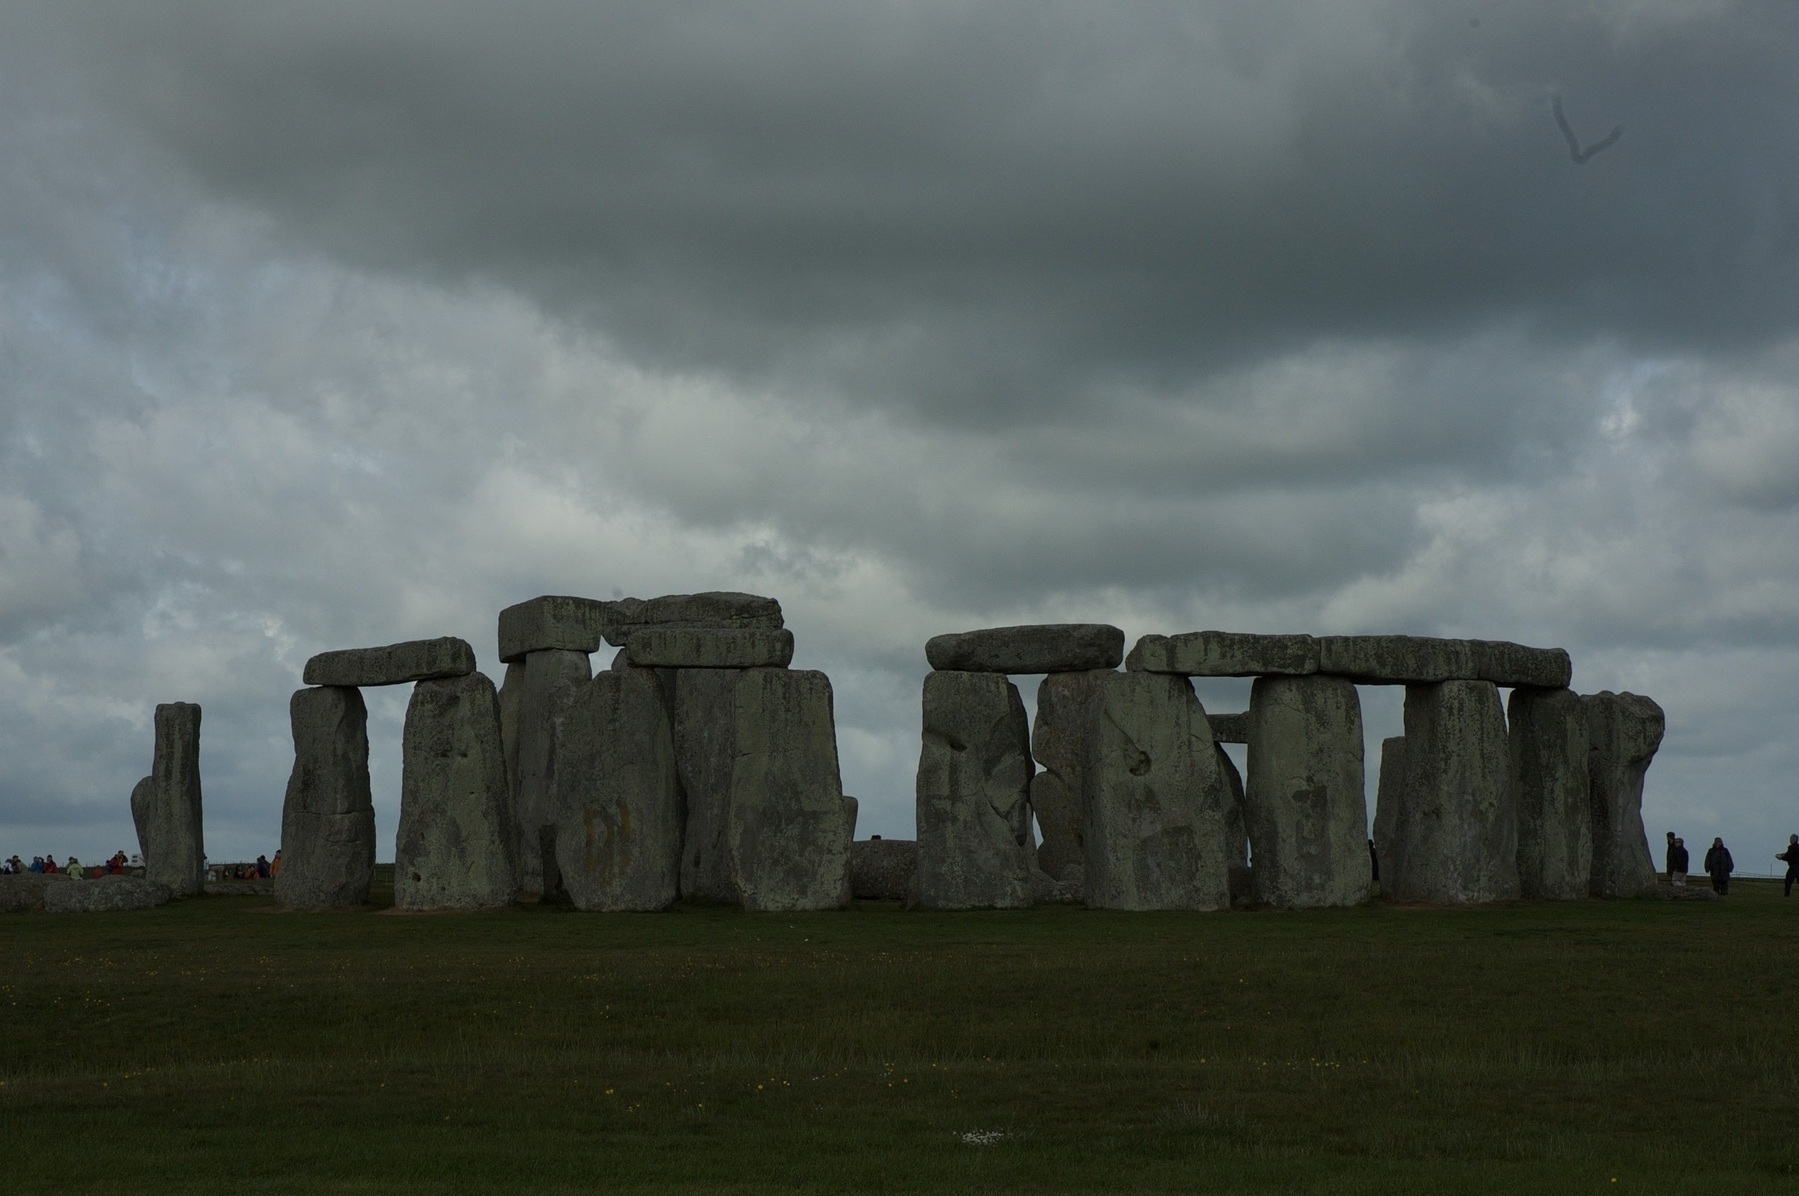 My First View of Stonehenge